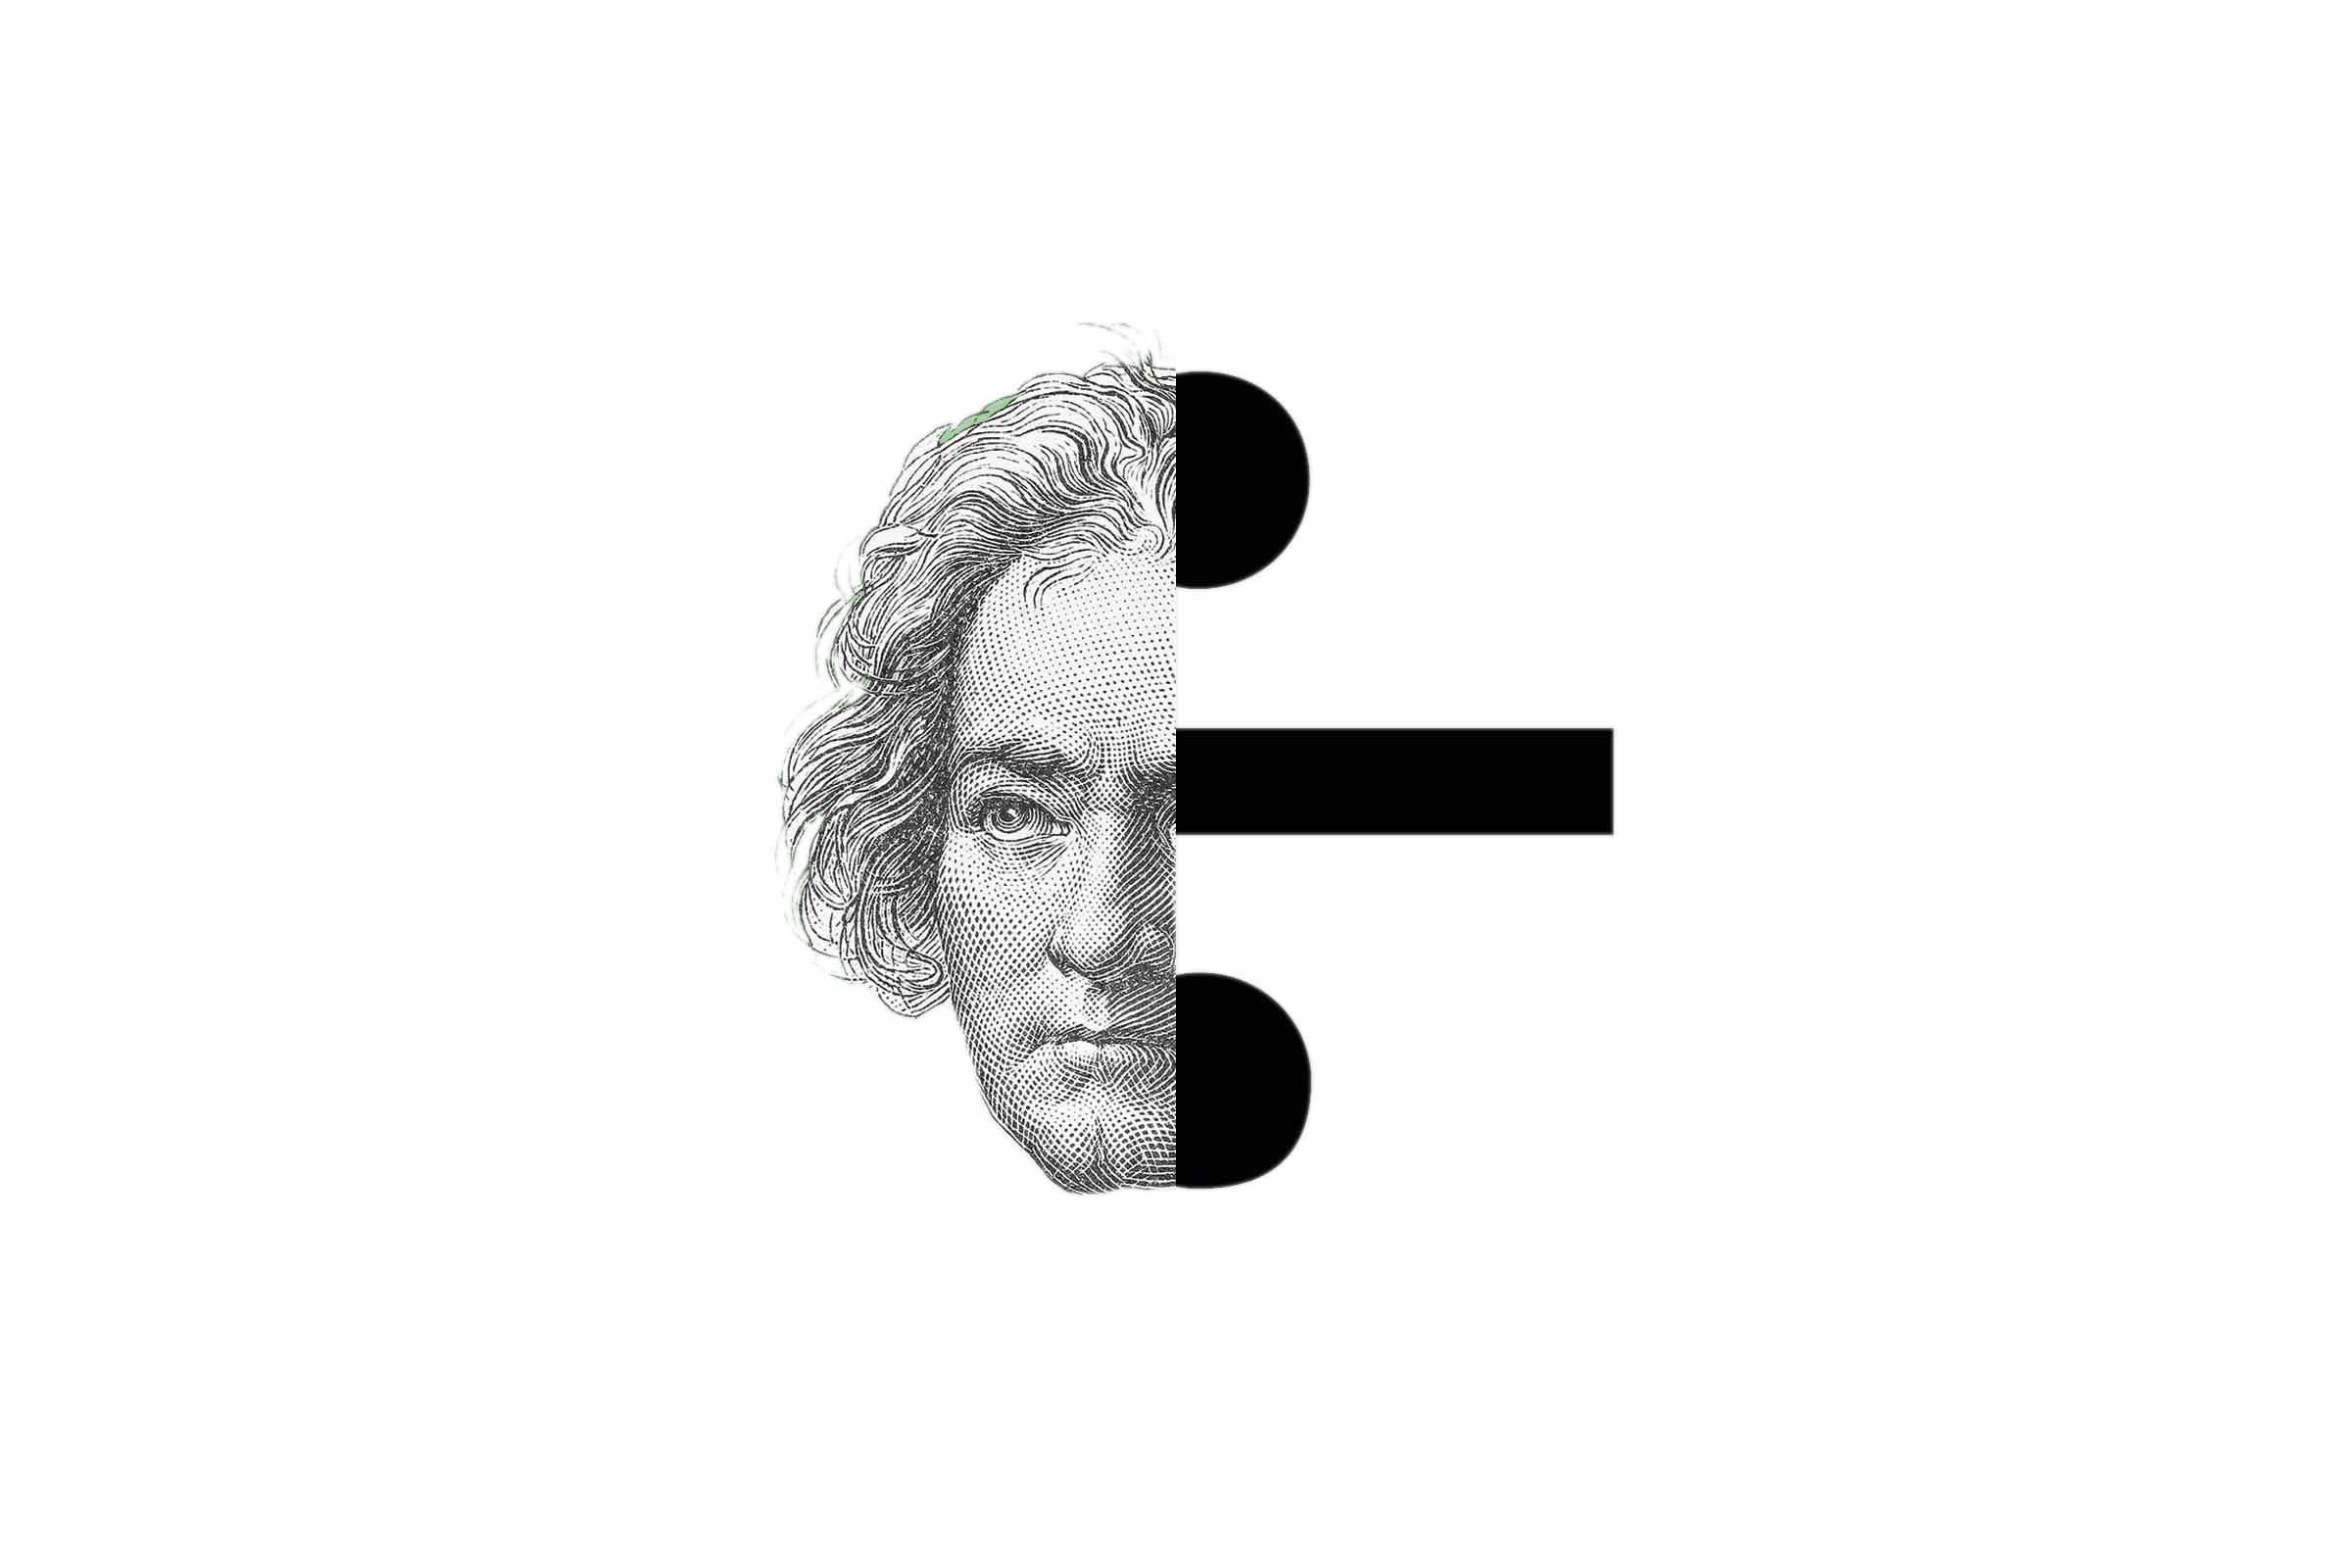 Beethoven never knew how to multiply or divide